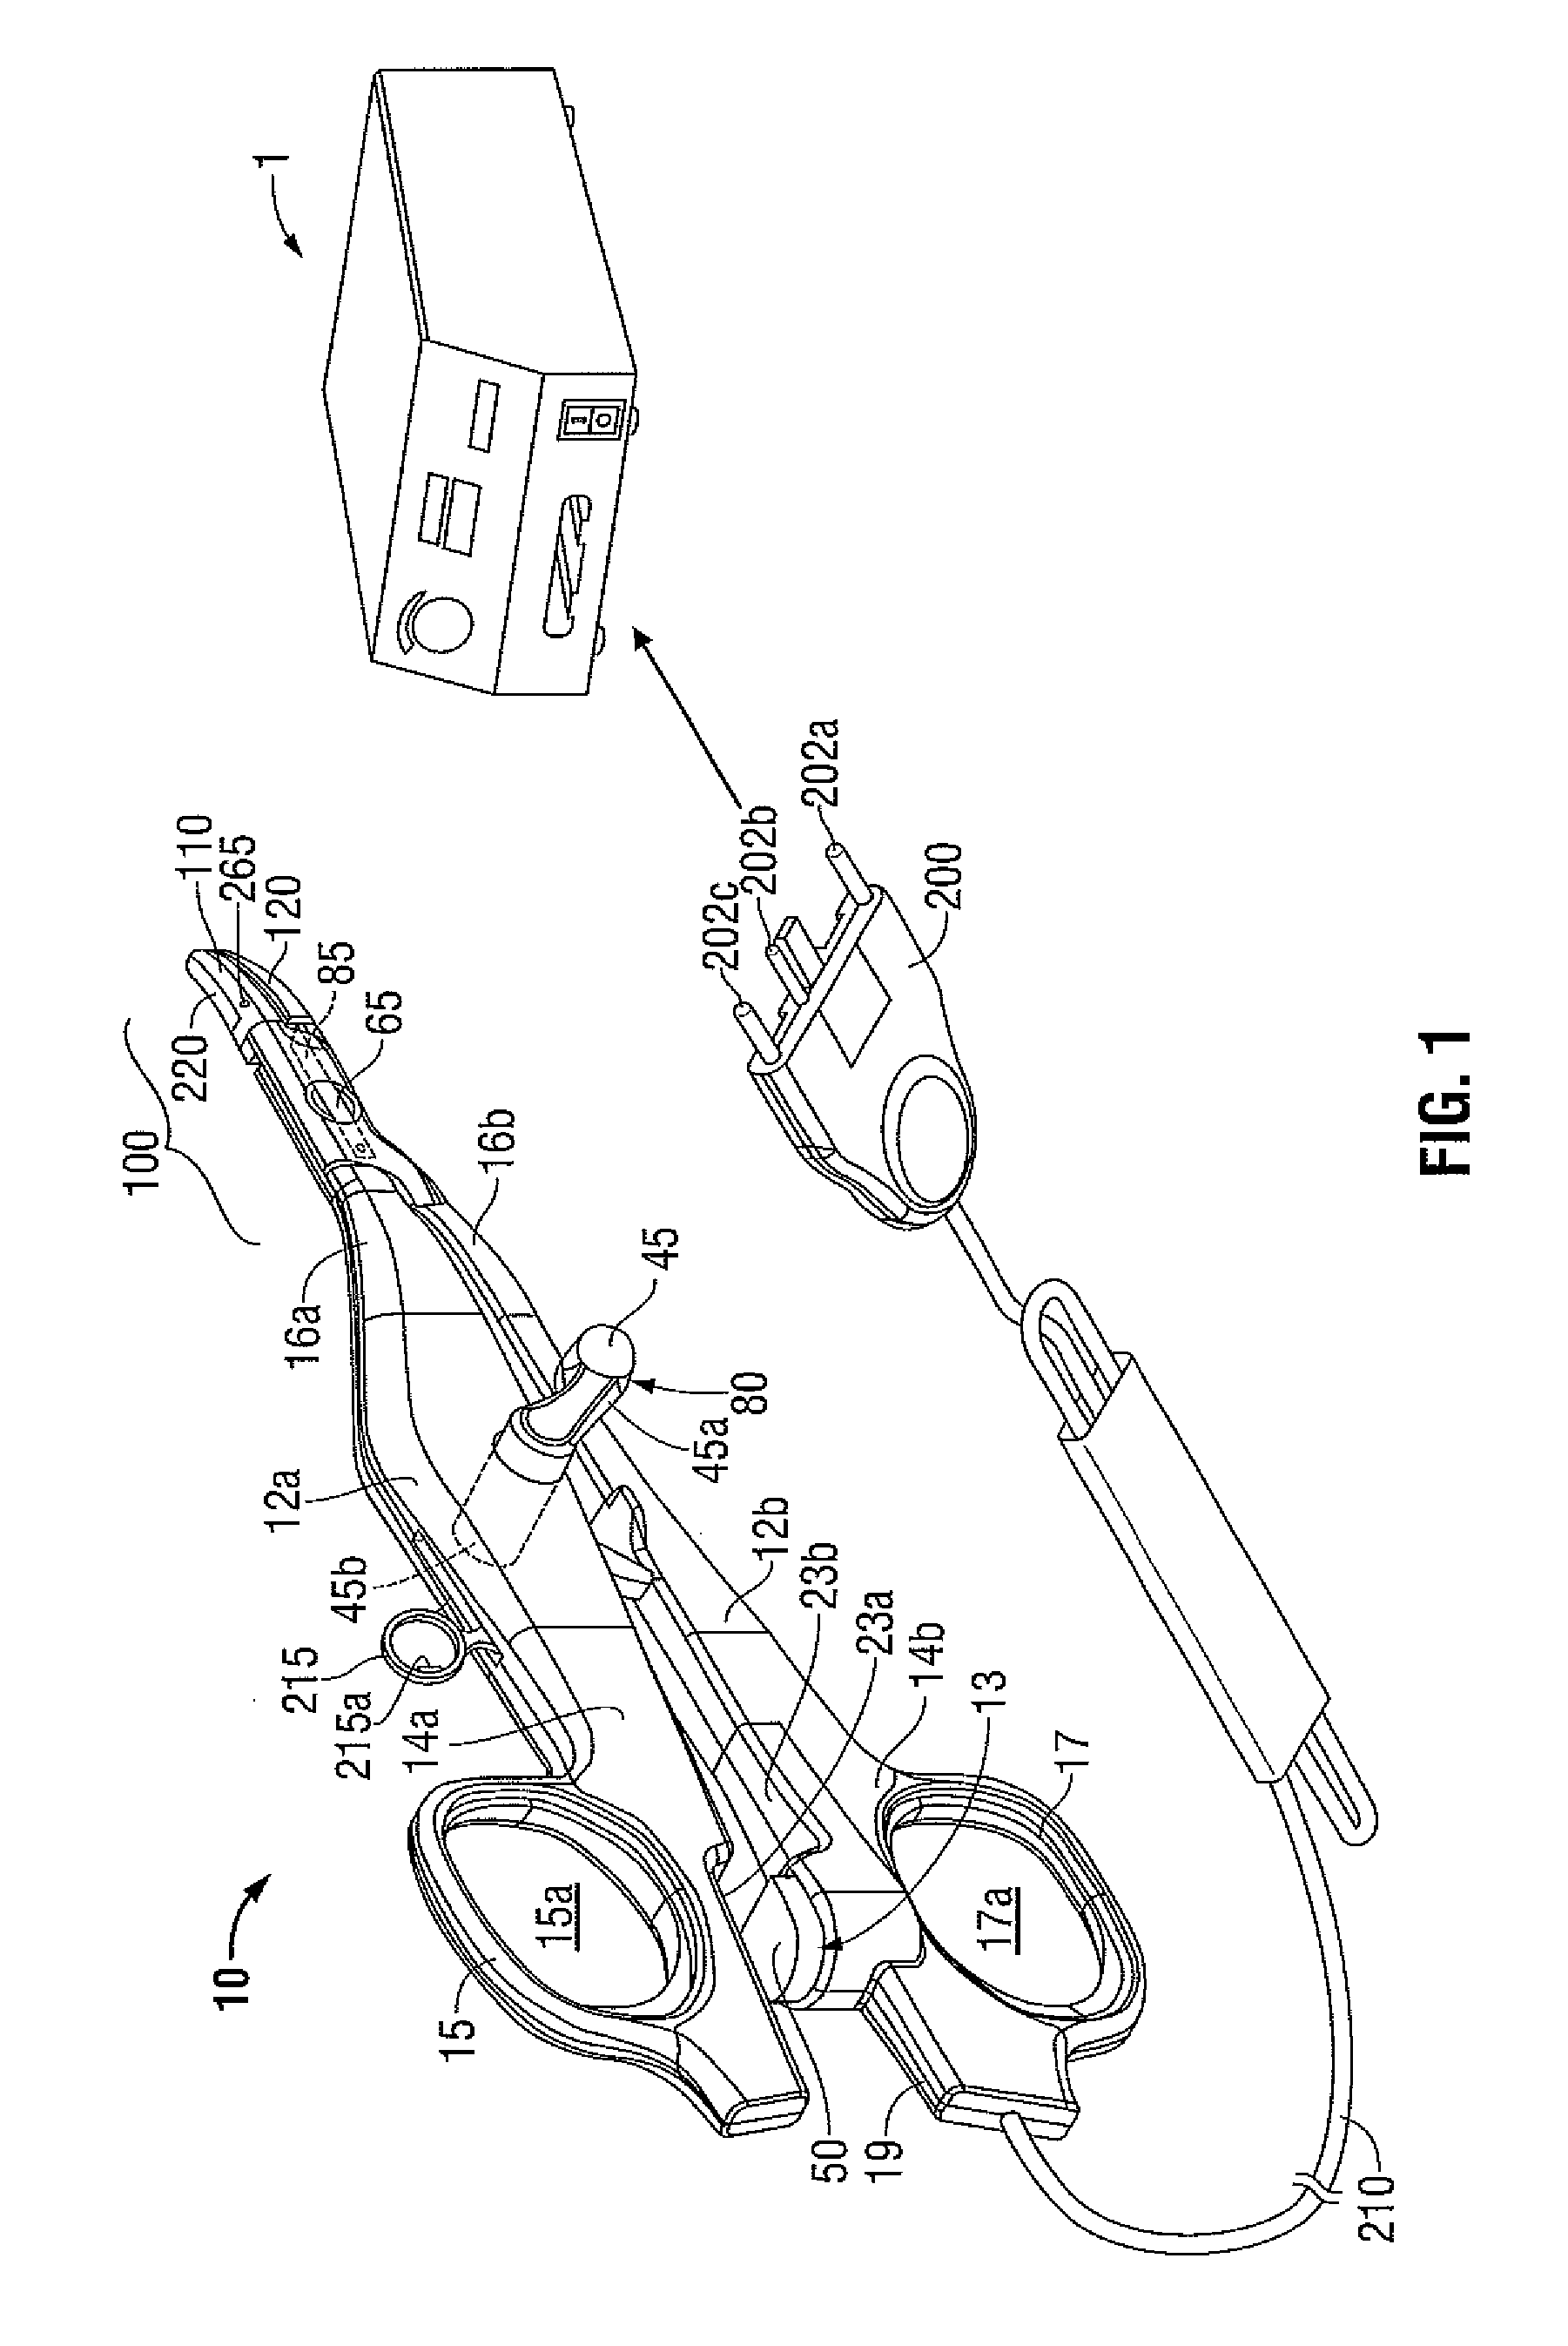 Dissection Scissors on Surgical Device